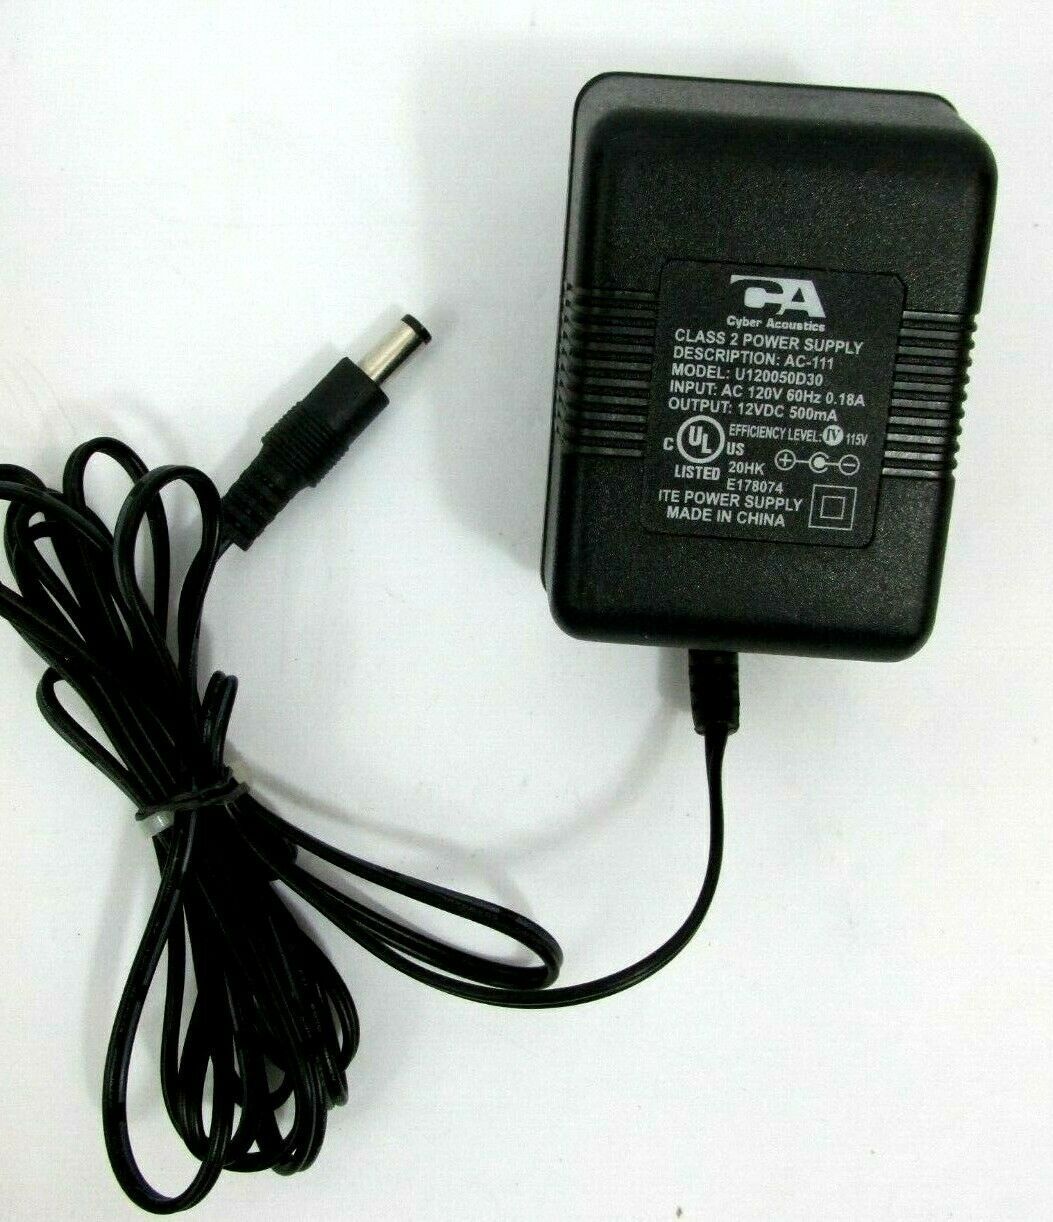 new Cyber Acoustics OEM AC-111 Power Supply Transformer Adapter 12vDC 500mA Type: AC/AC Adapter Connection Split/Dupl